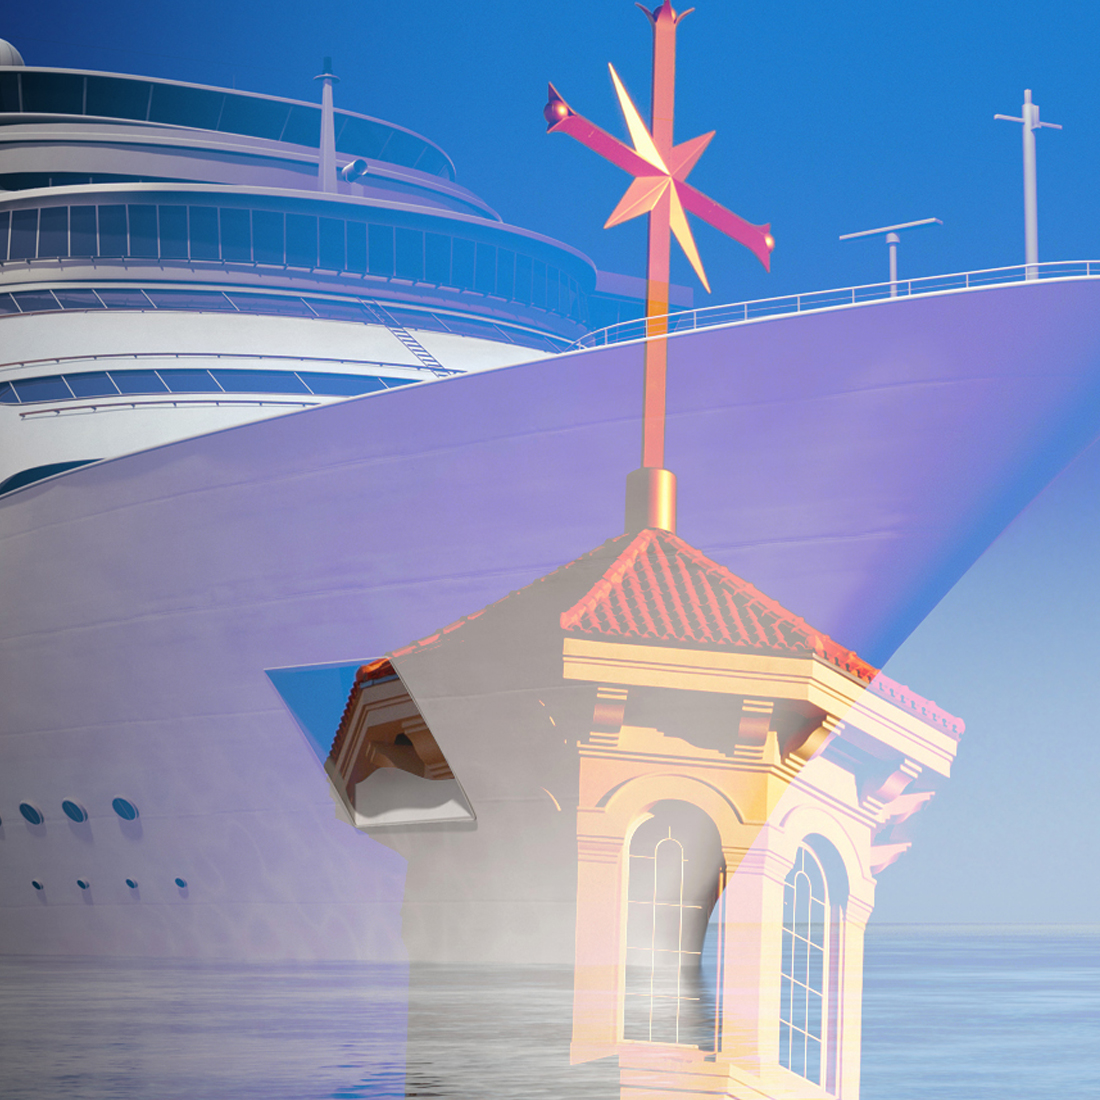 Cruise ship on water with the church of Scientology steeple superimposed over the ship